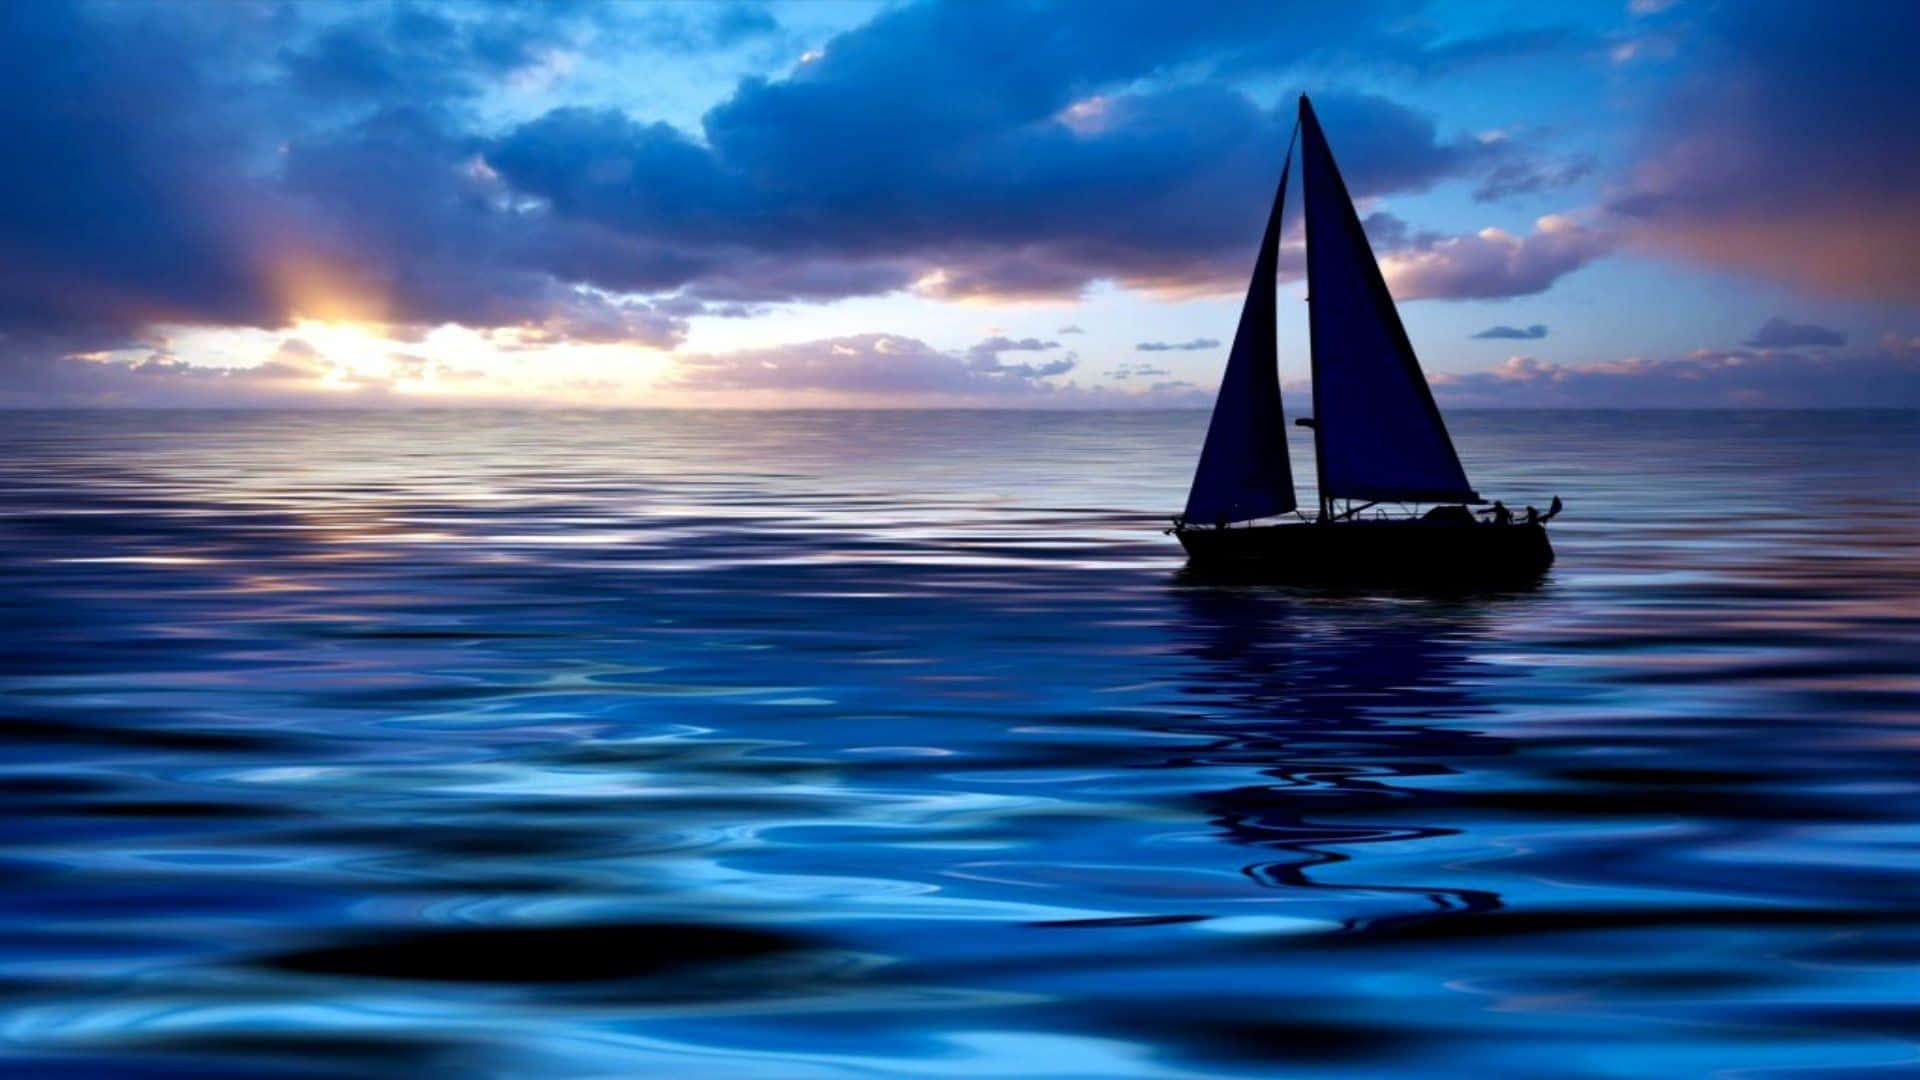 Blowing in the Wind - The beauty of a sailboat in motion